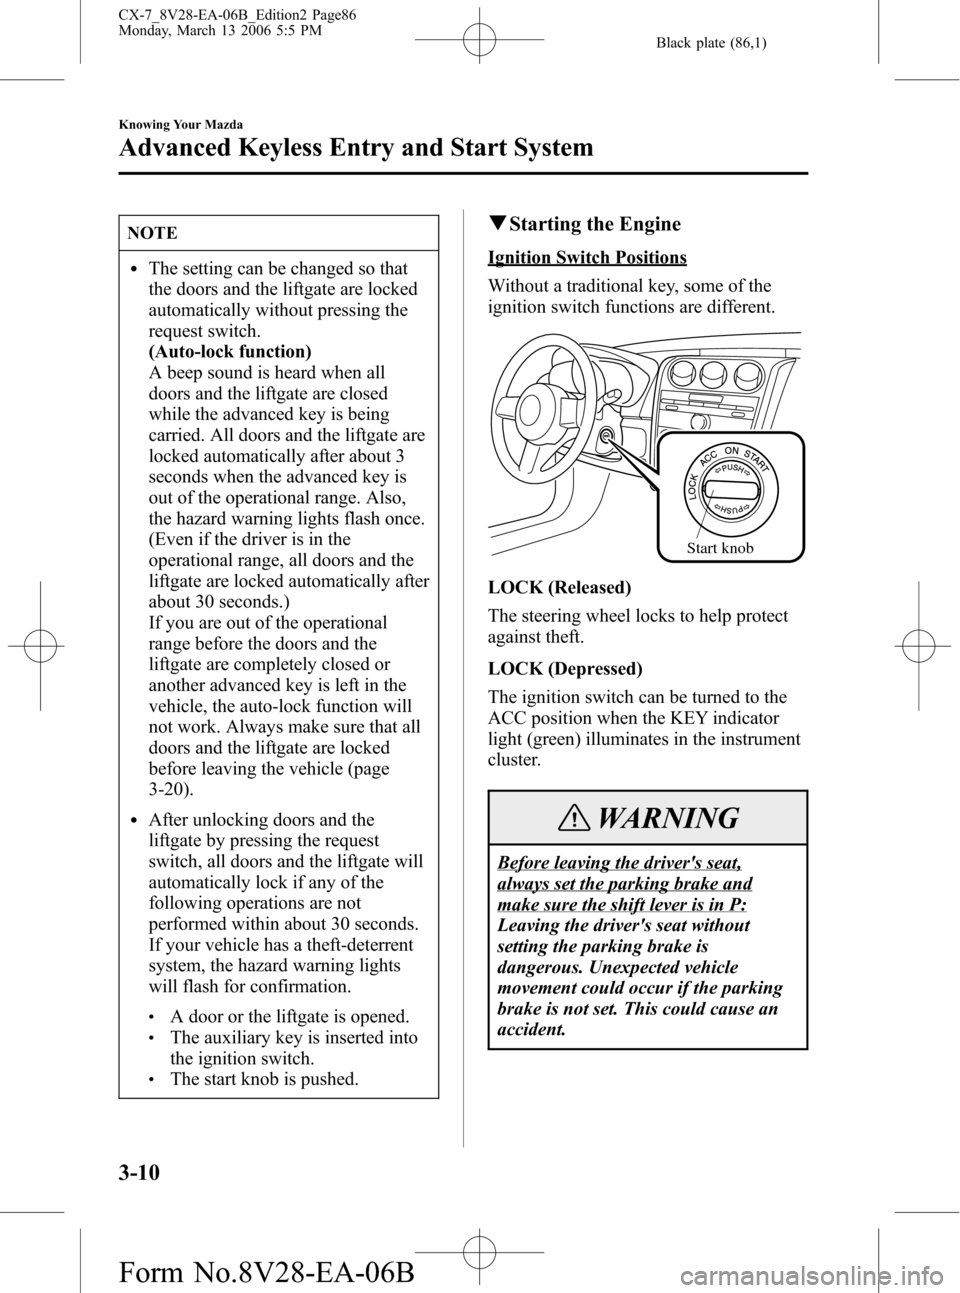 MAZDA MODEL CX-7 2007  Owners Manual (in English) Black plate (86,1)
NOTE
lThe setting can be changed so that
the doors and the liftgate are locked
automatically without pressing the
request switch.
(Auto-lock function)
A beep sound is heard when all